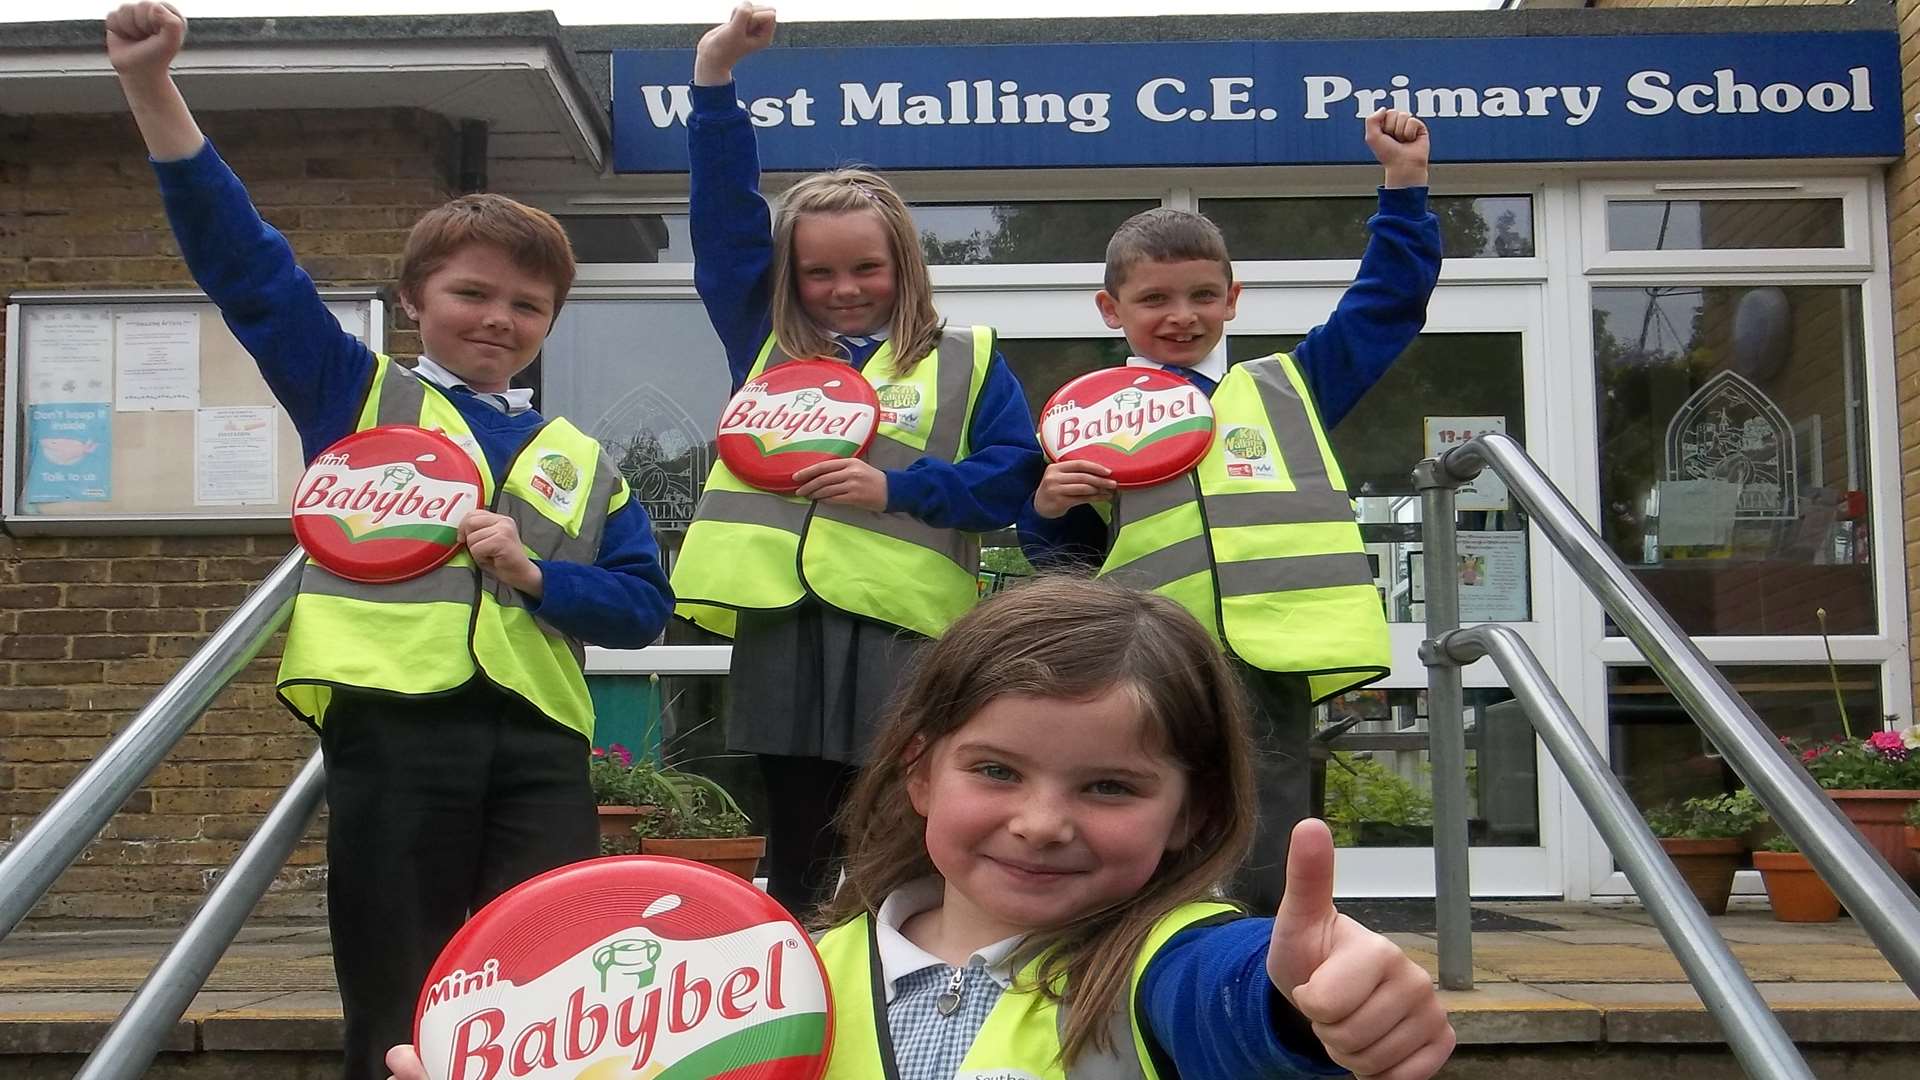 William, 9, Alex, 8, Scarlett, 9, and Tamsin, 7, from West Malling Primary School